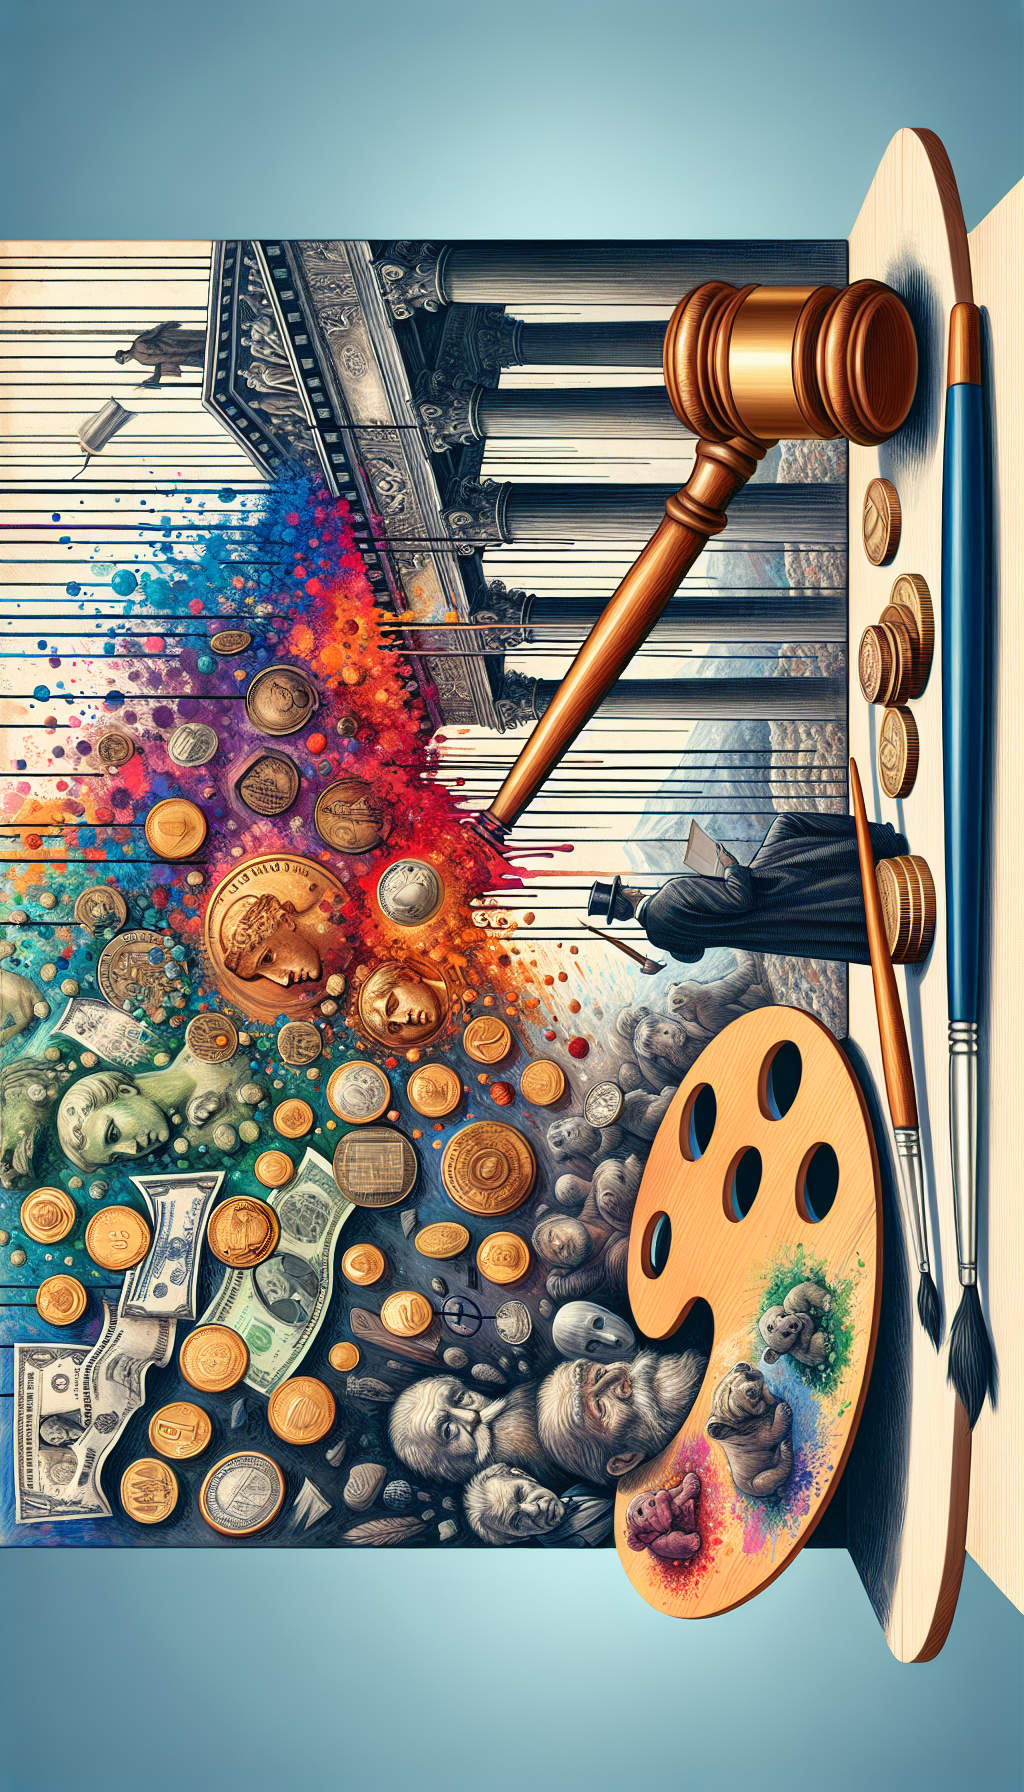 An illustration depicting an auctioneer's gavel poised above a palette bedecked with coins and a paintbrush, with iconic art pieces morphing into currency notes in the background, representing the fusion of art and its monetary value. The artistic styles of the notes and paintings vary randomly, showcasing impressionist, abstract, and realist touches to symbolize diverse valuation factors.